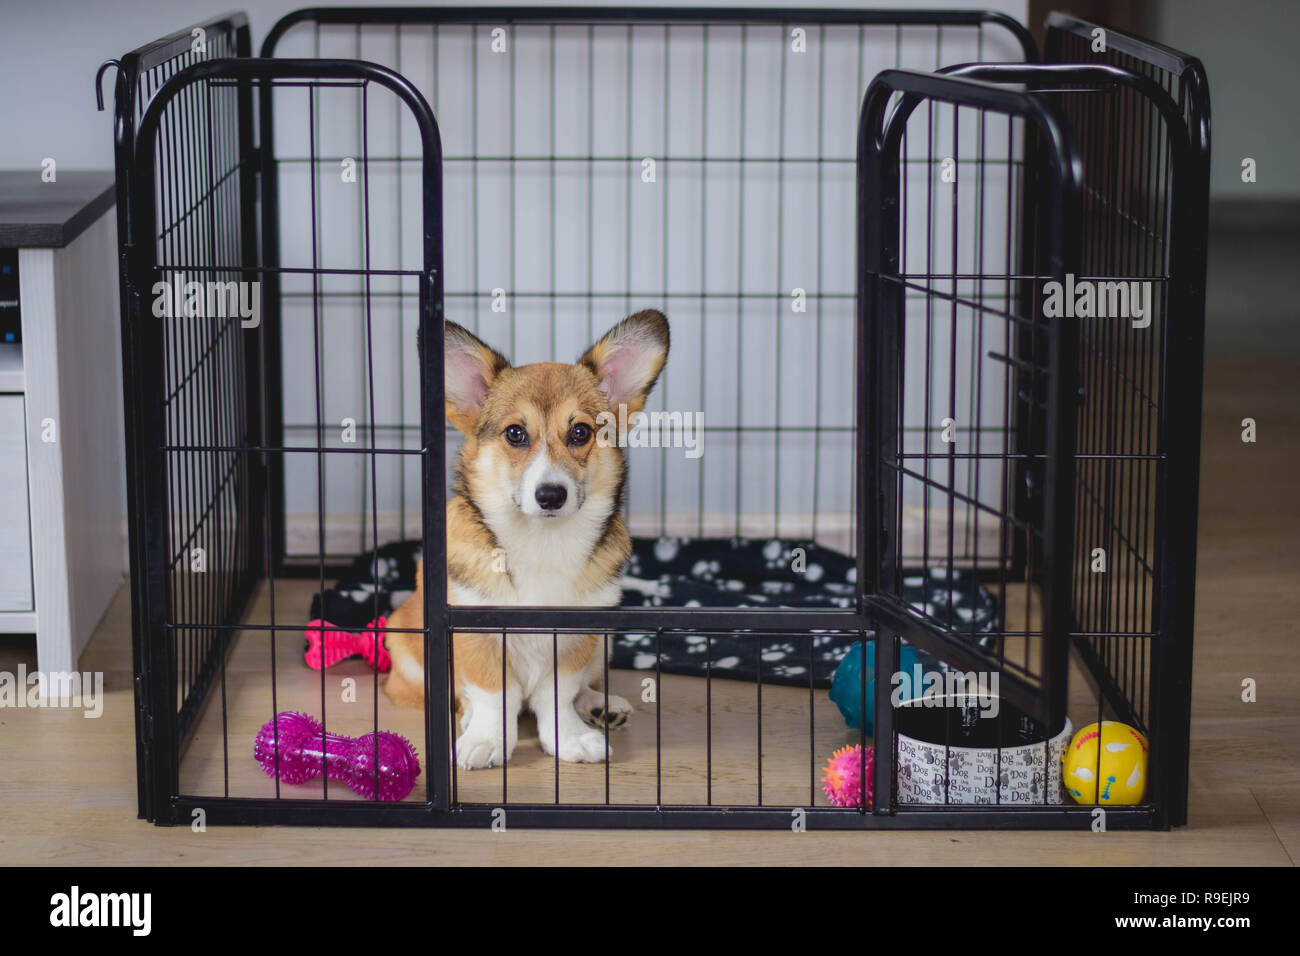 Crate Training High Resolution Stock Photography and Images - Alamy